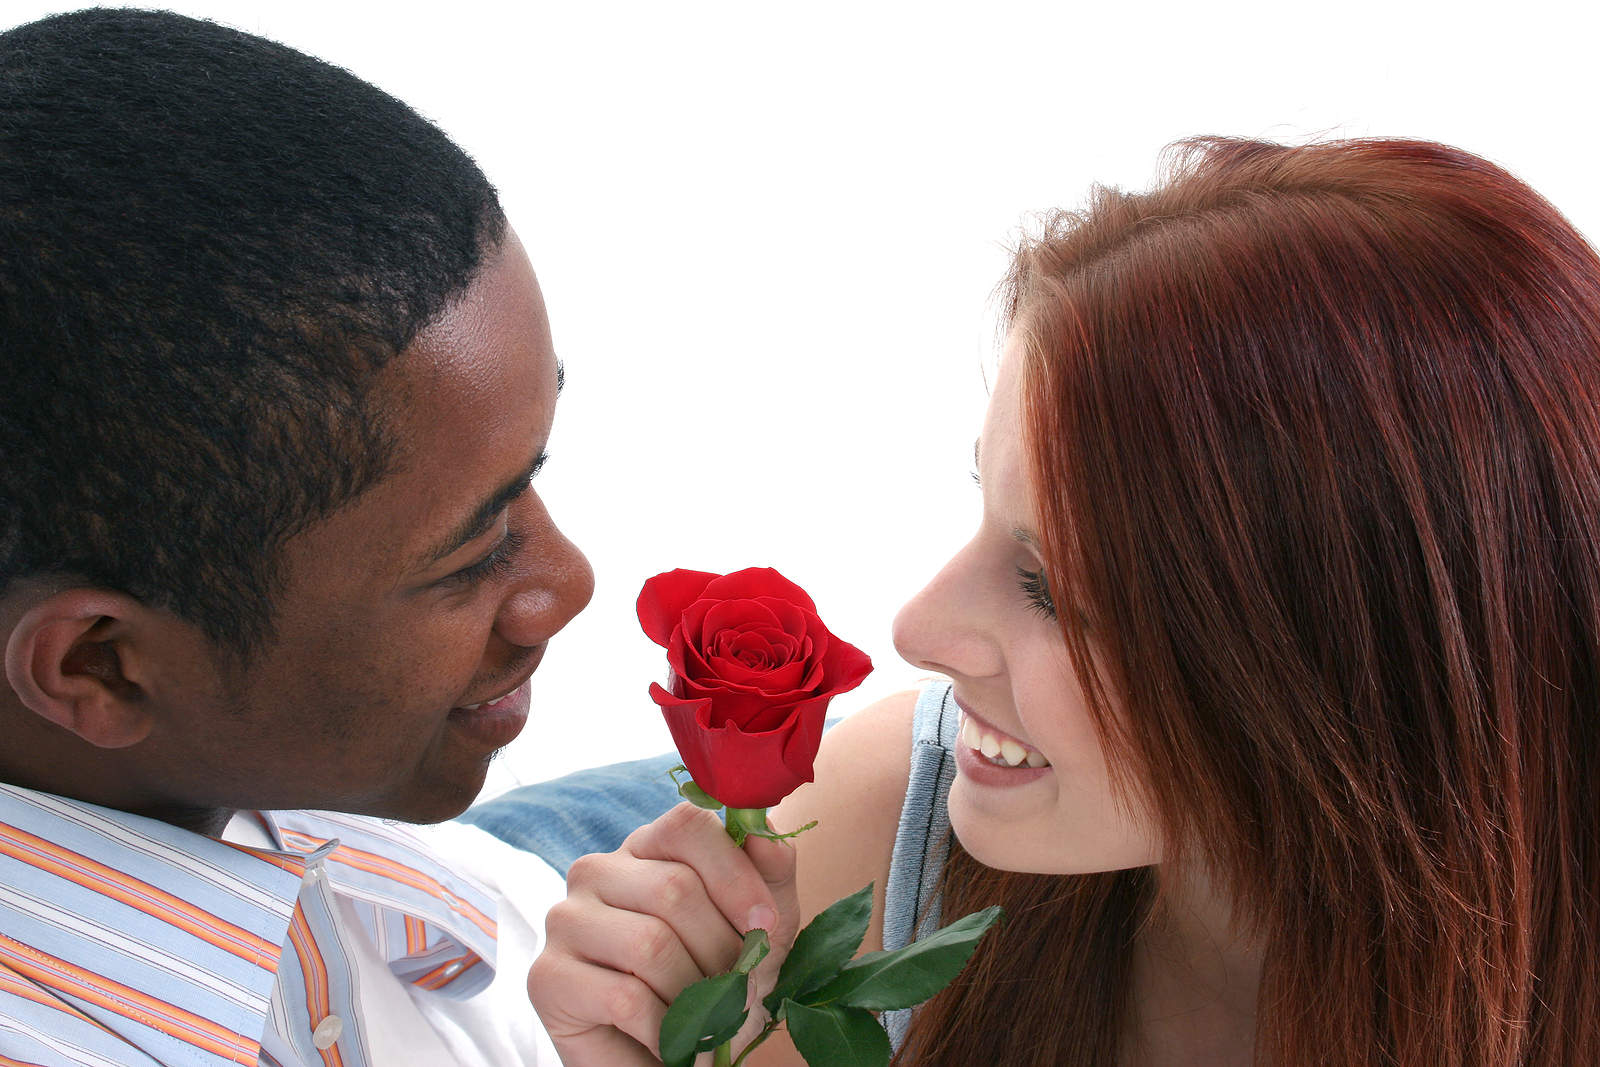 Interracial dating and marriage